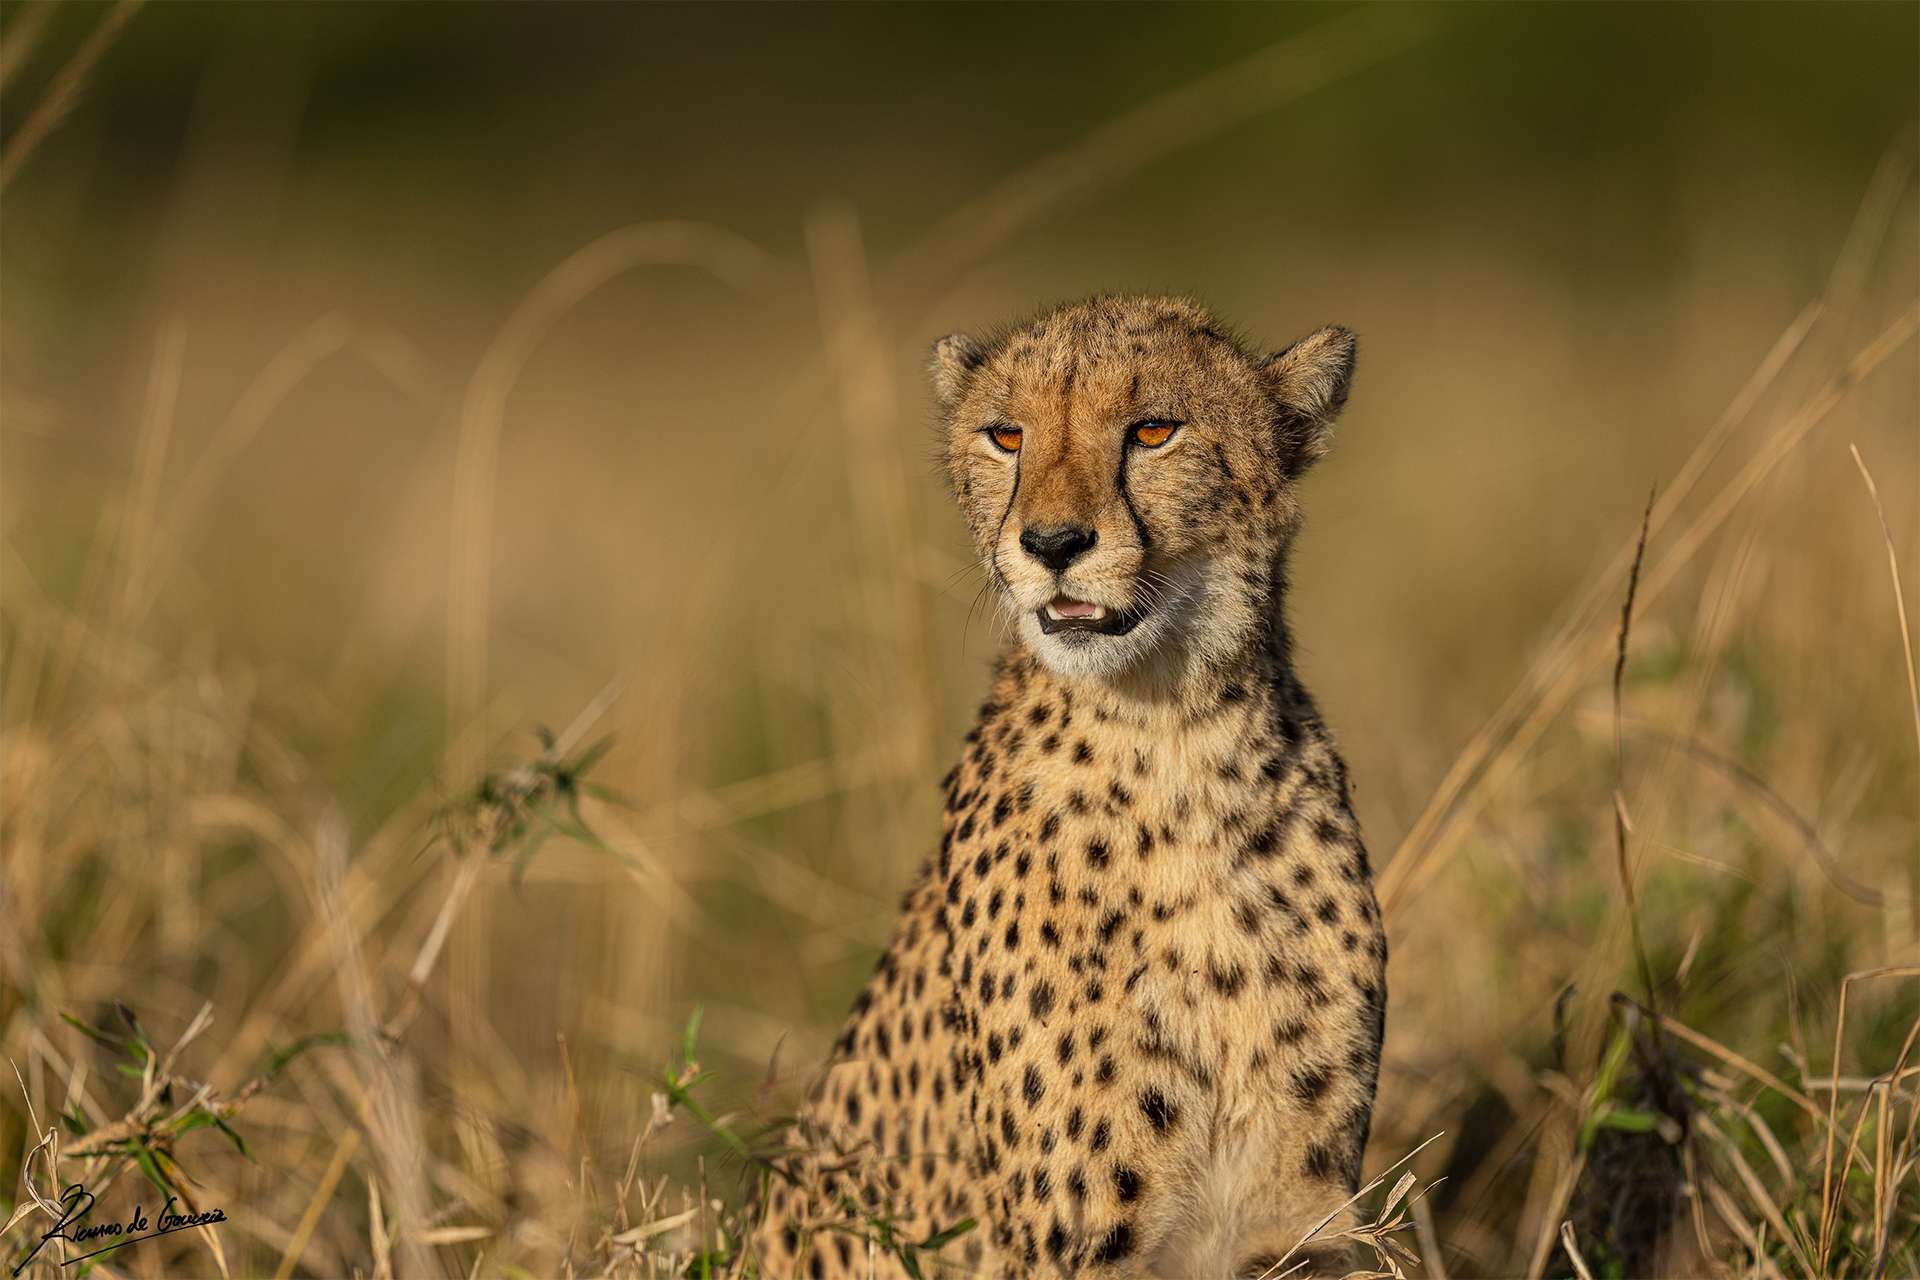 Cheetah calls out to cubs from between tall grasses of africa savanna 